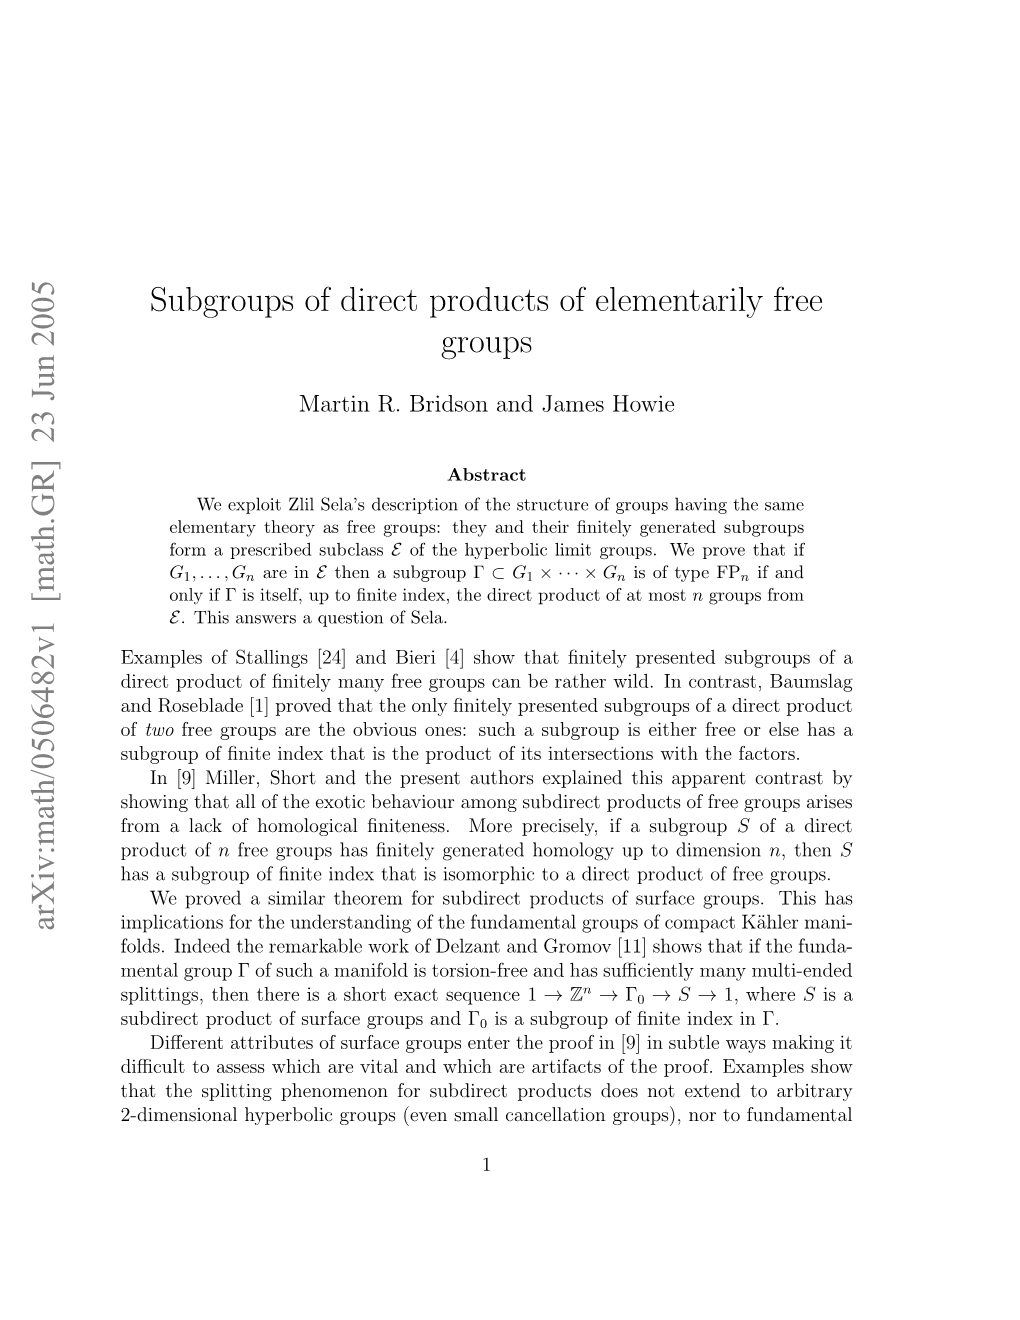 Subgroups of Direct Products of Elementarily Free Groups